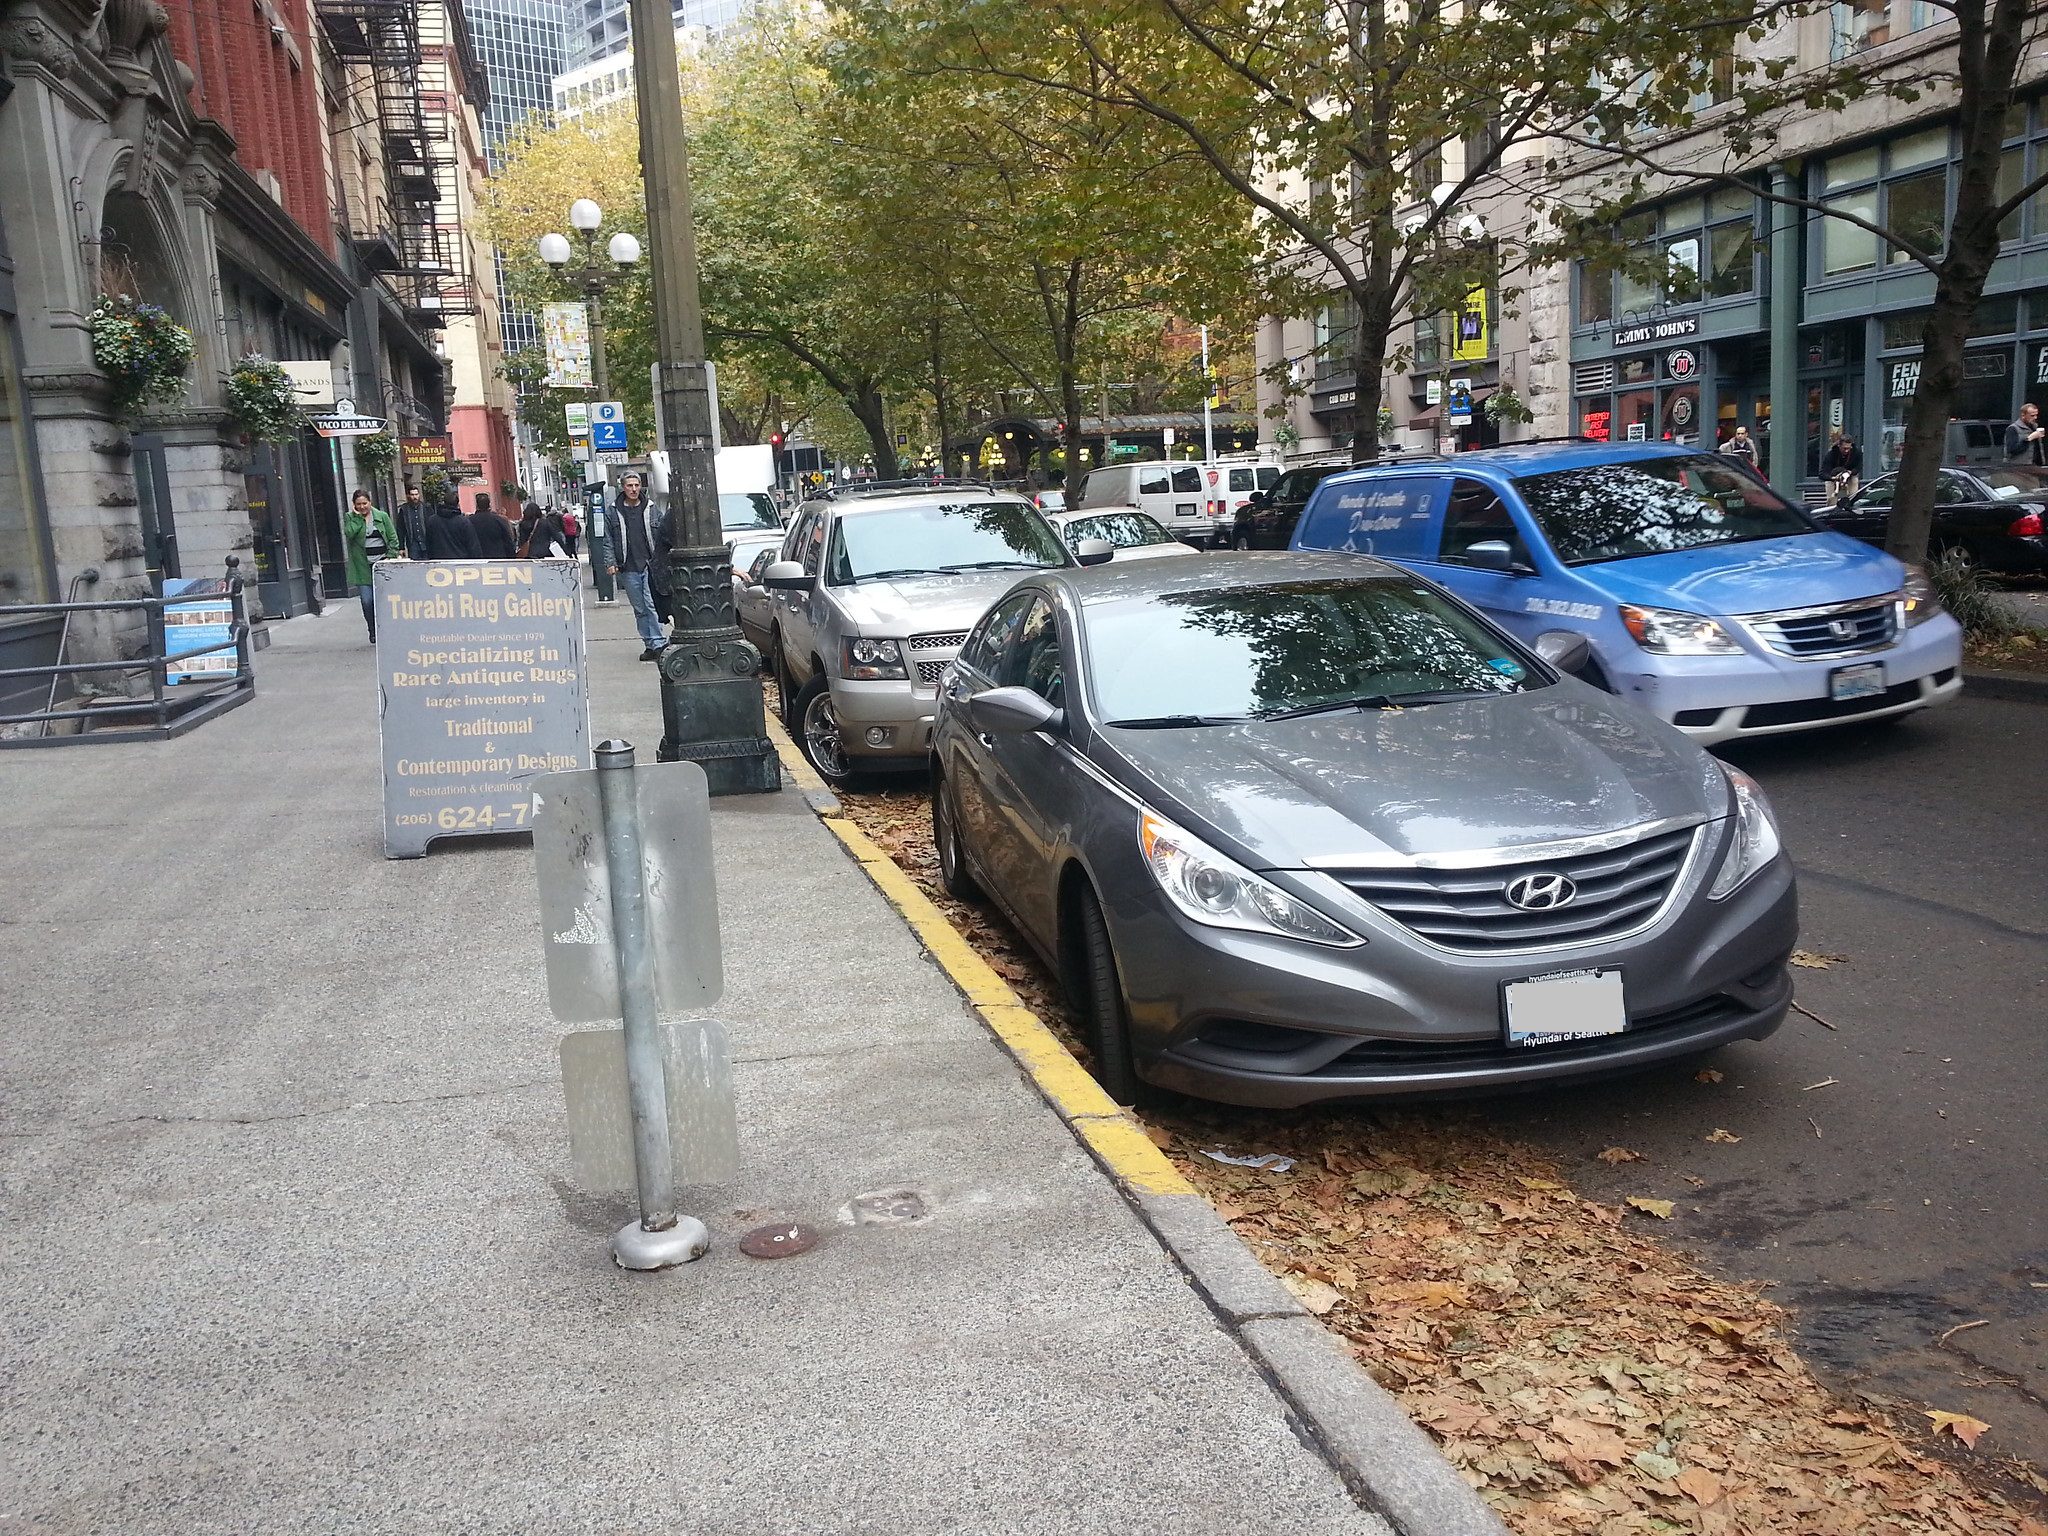 Several parked cars along the curbside in Pioneer Square. Large trees and buildings are in the background, on a fall day.